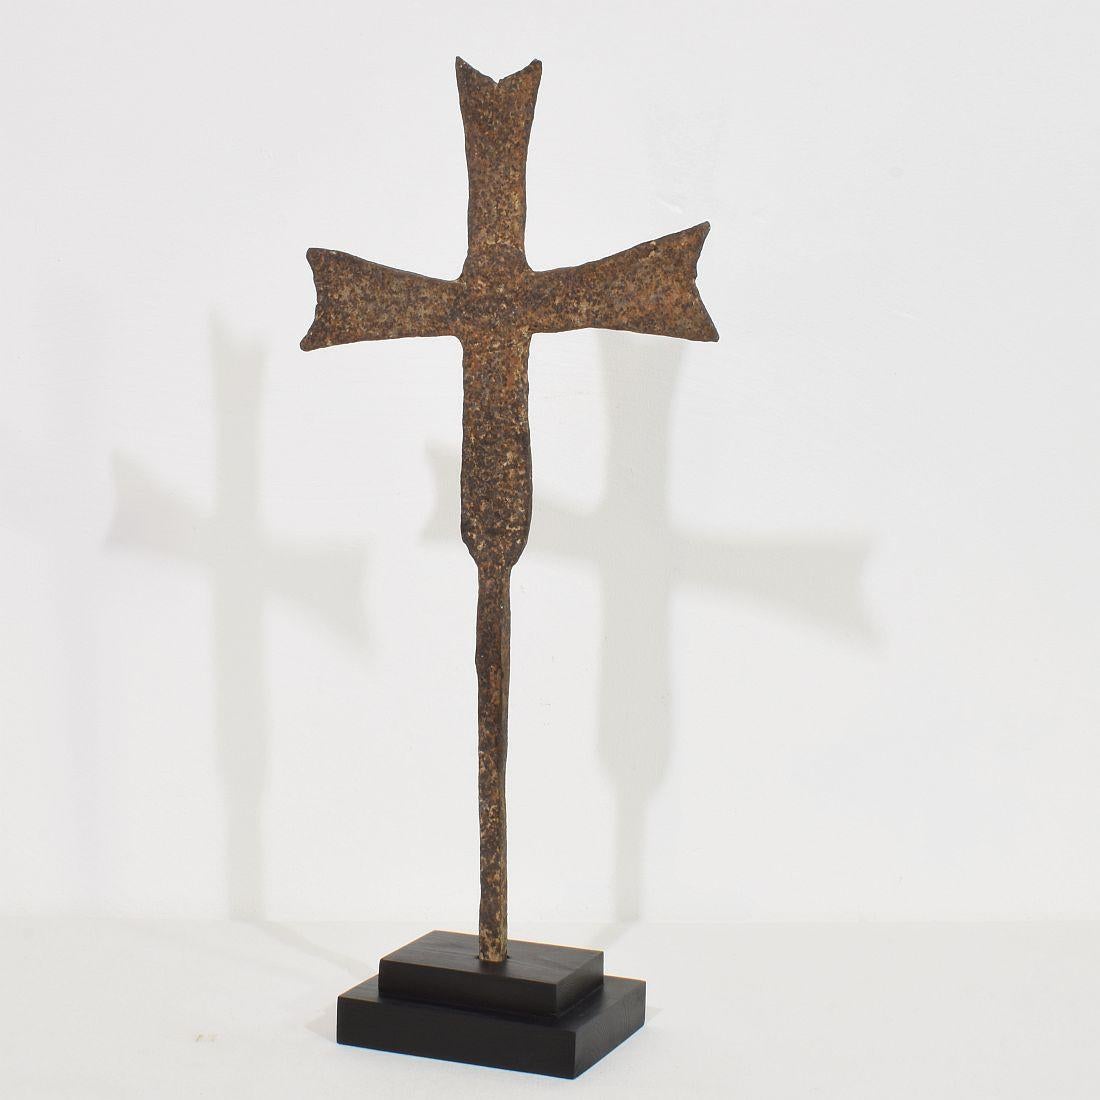 Unique hand forged iron cross that once stood in the centre of a Provençal village.
France, circa 1450-1550. Weathered.
Measurement is with the wooden base.